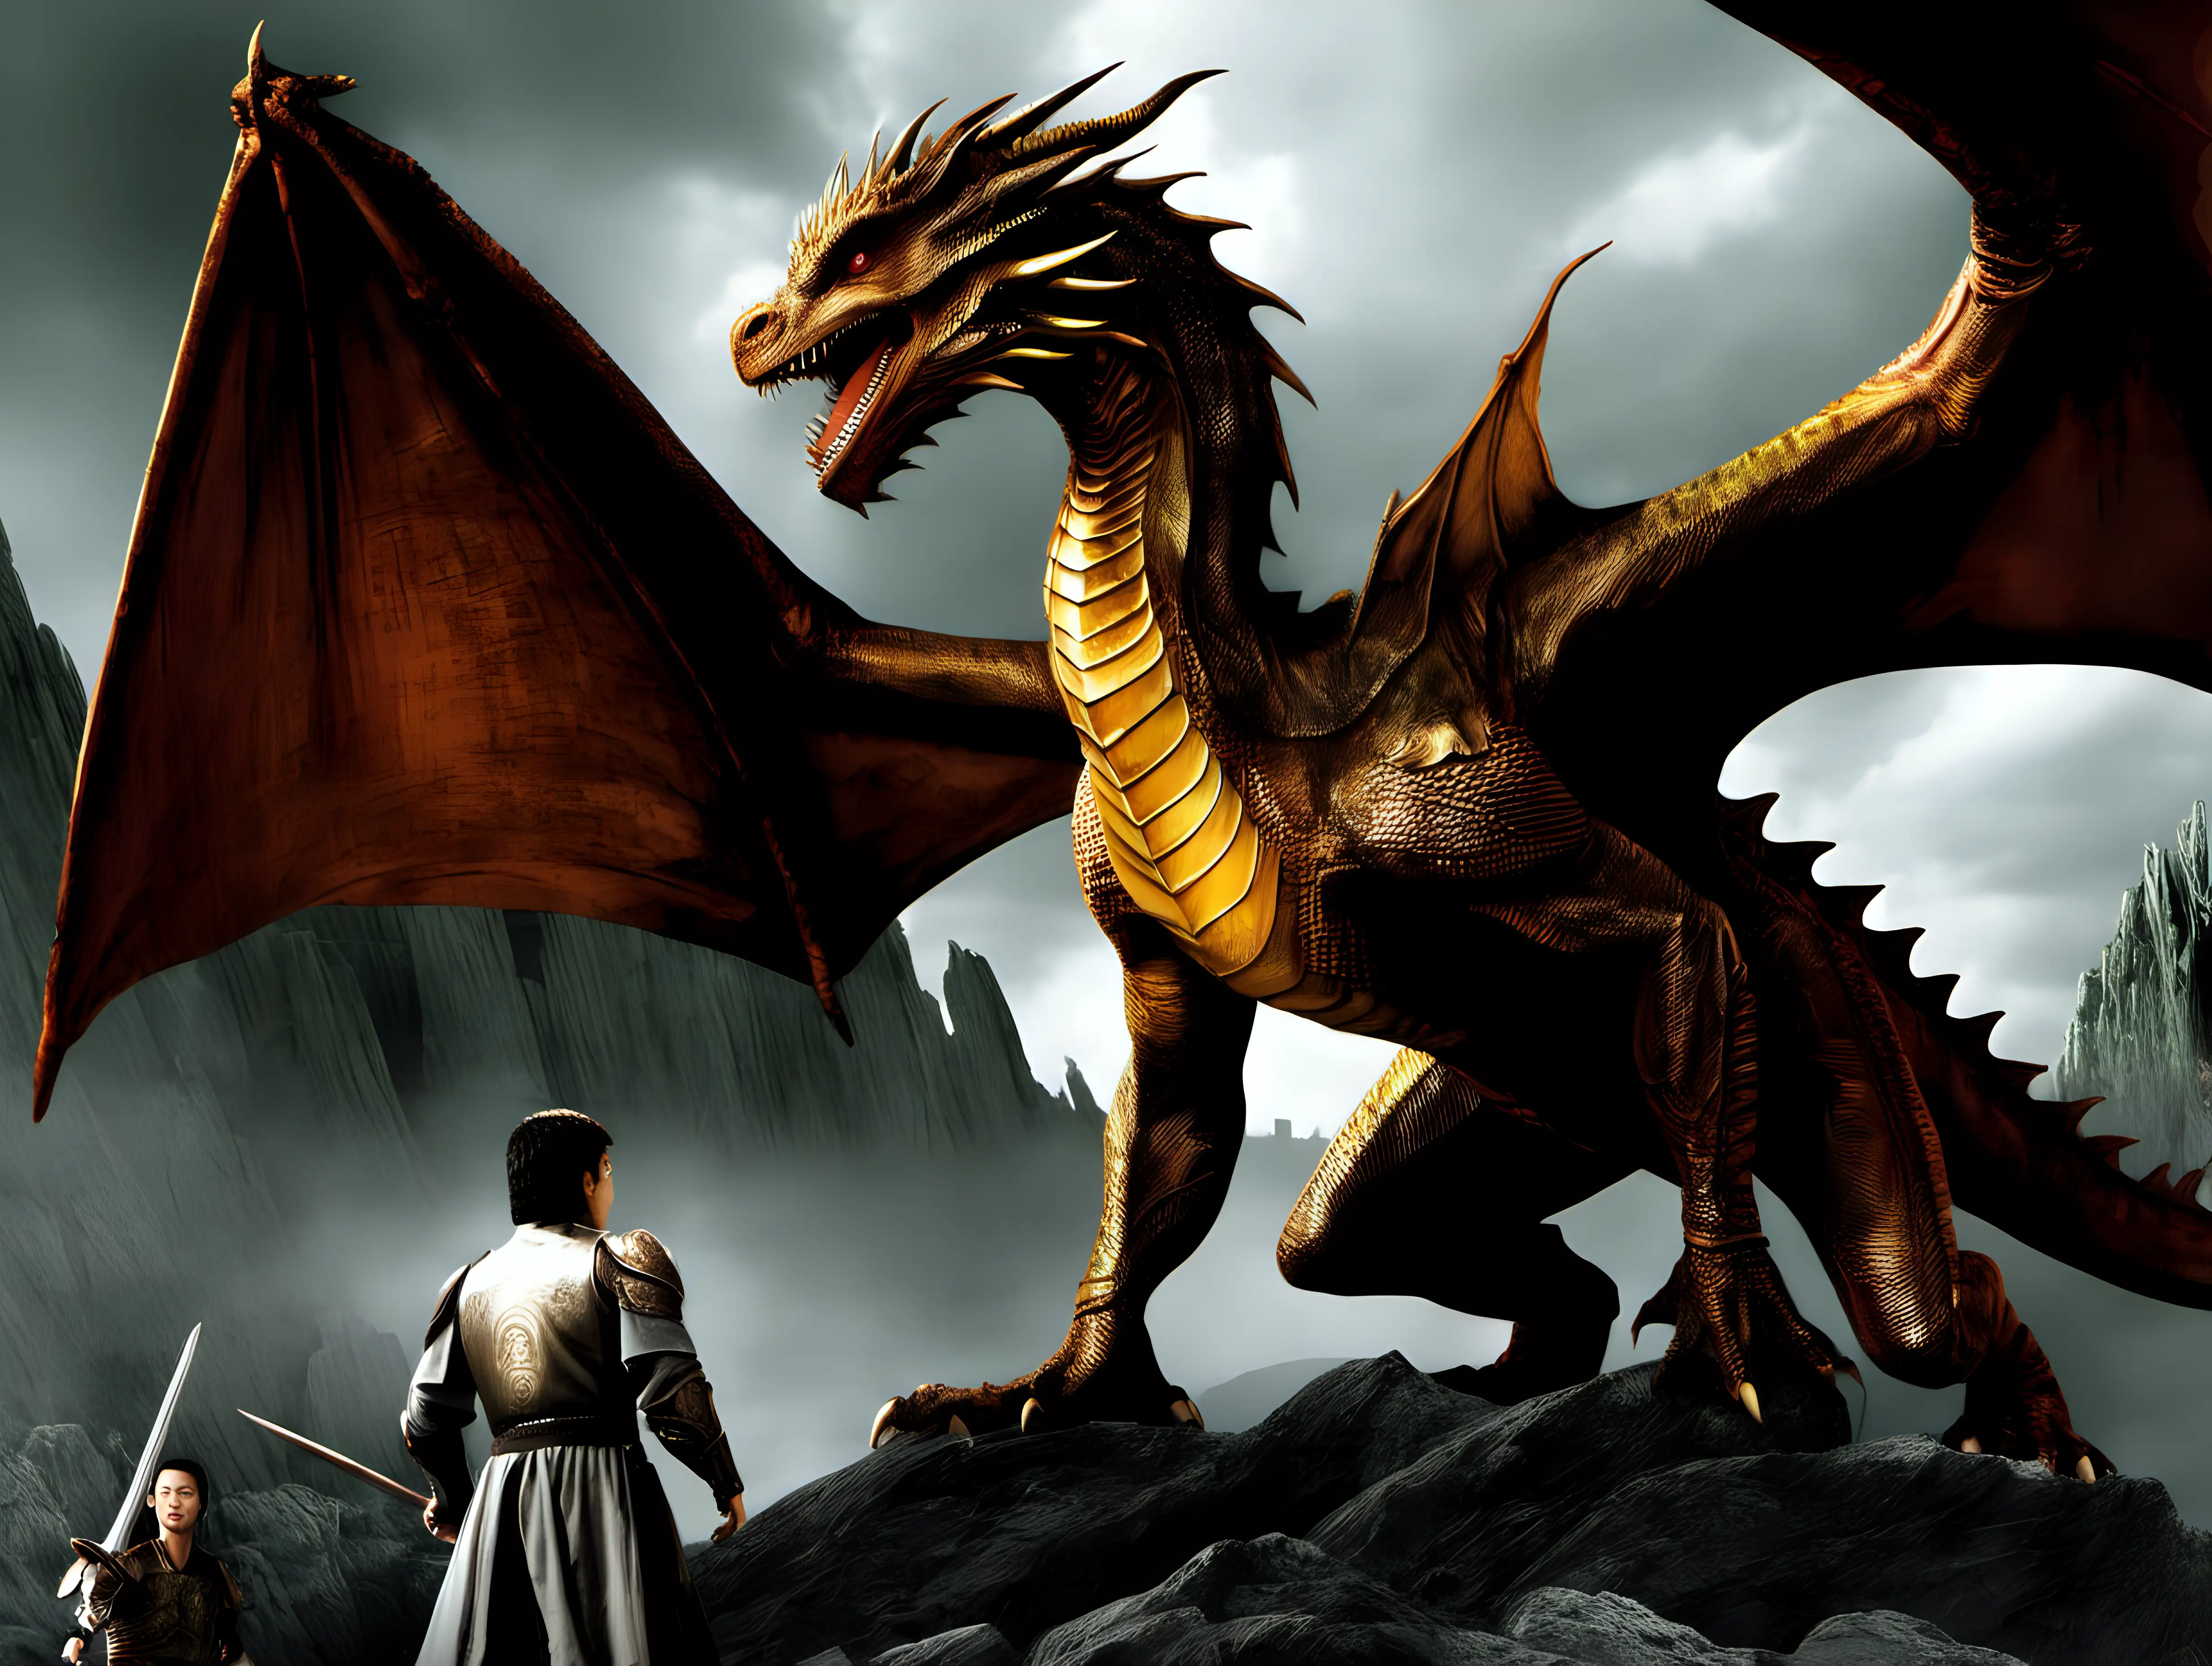 Age Of The Dragons